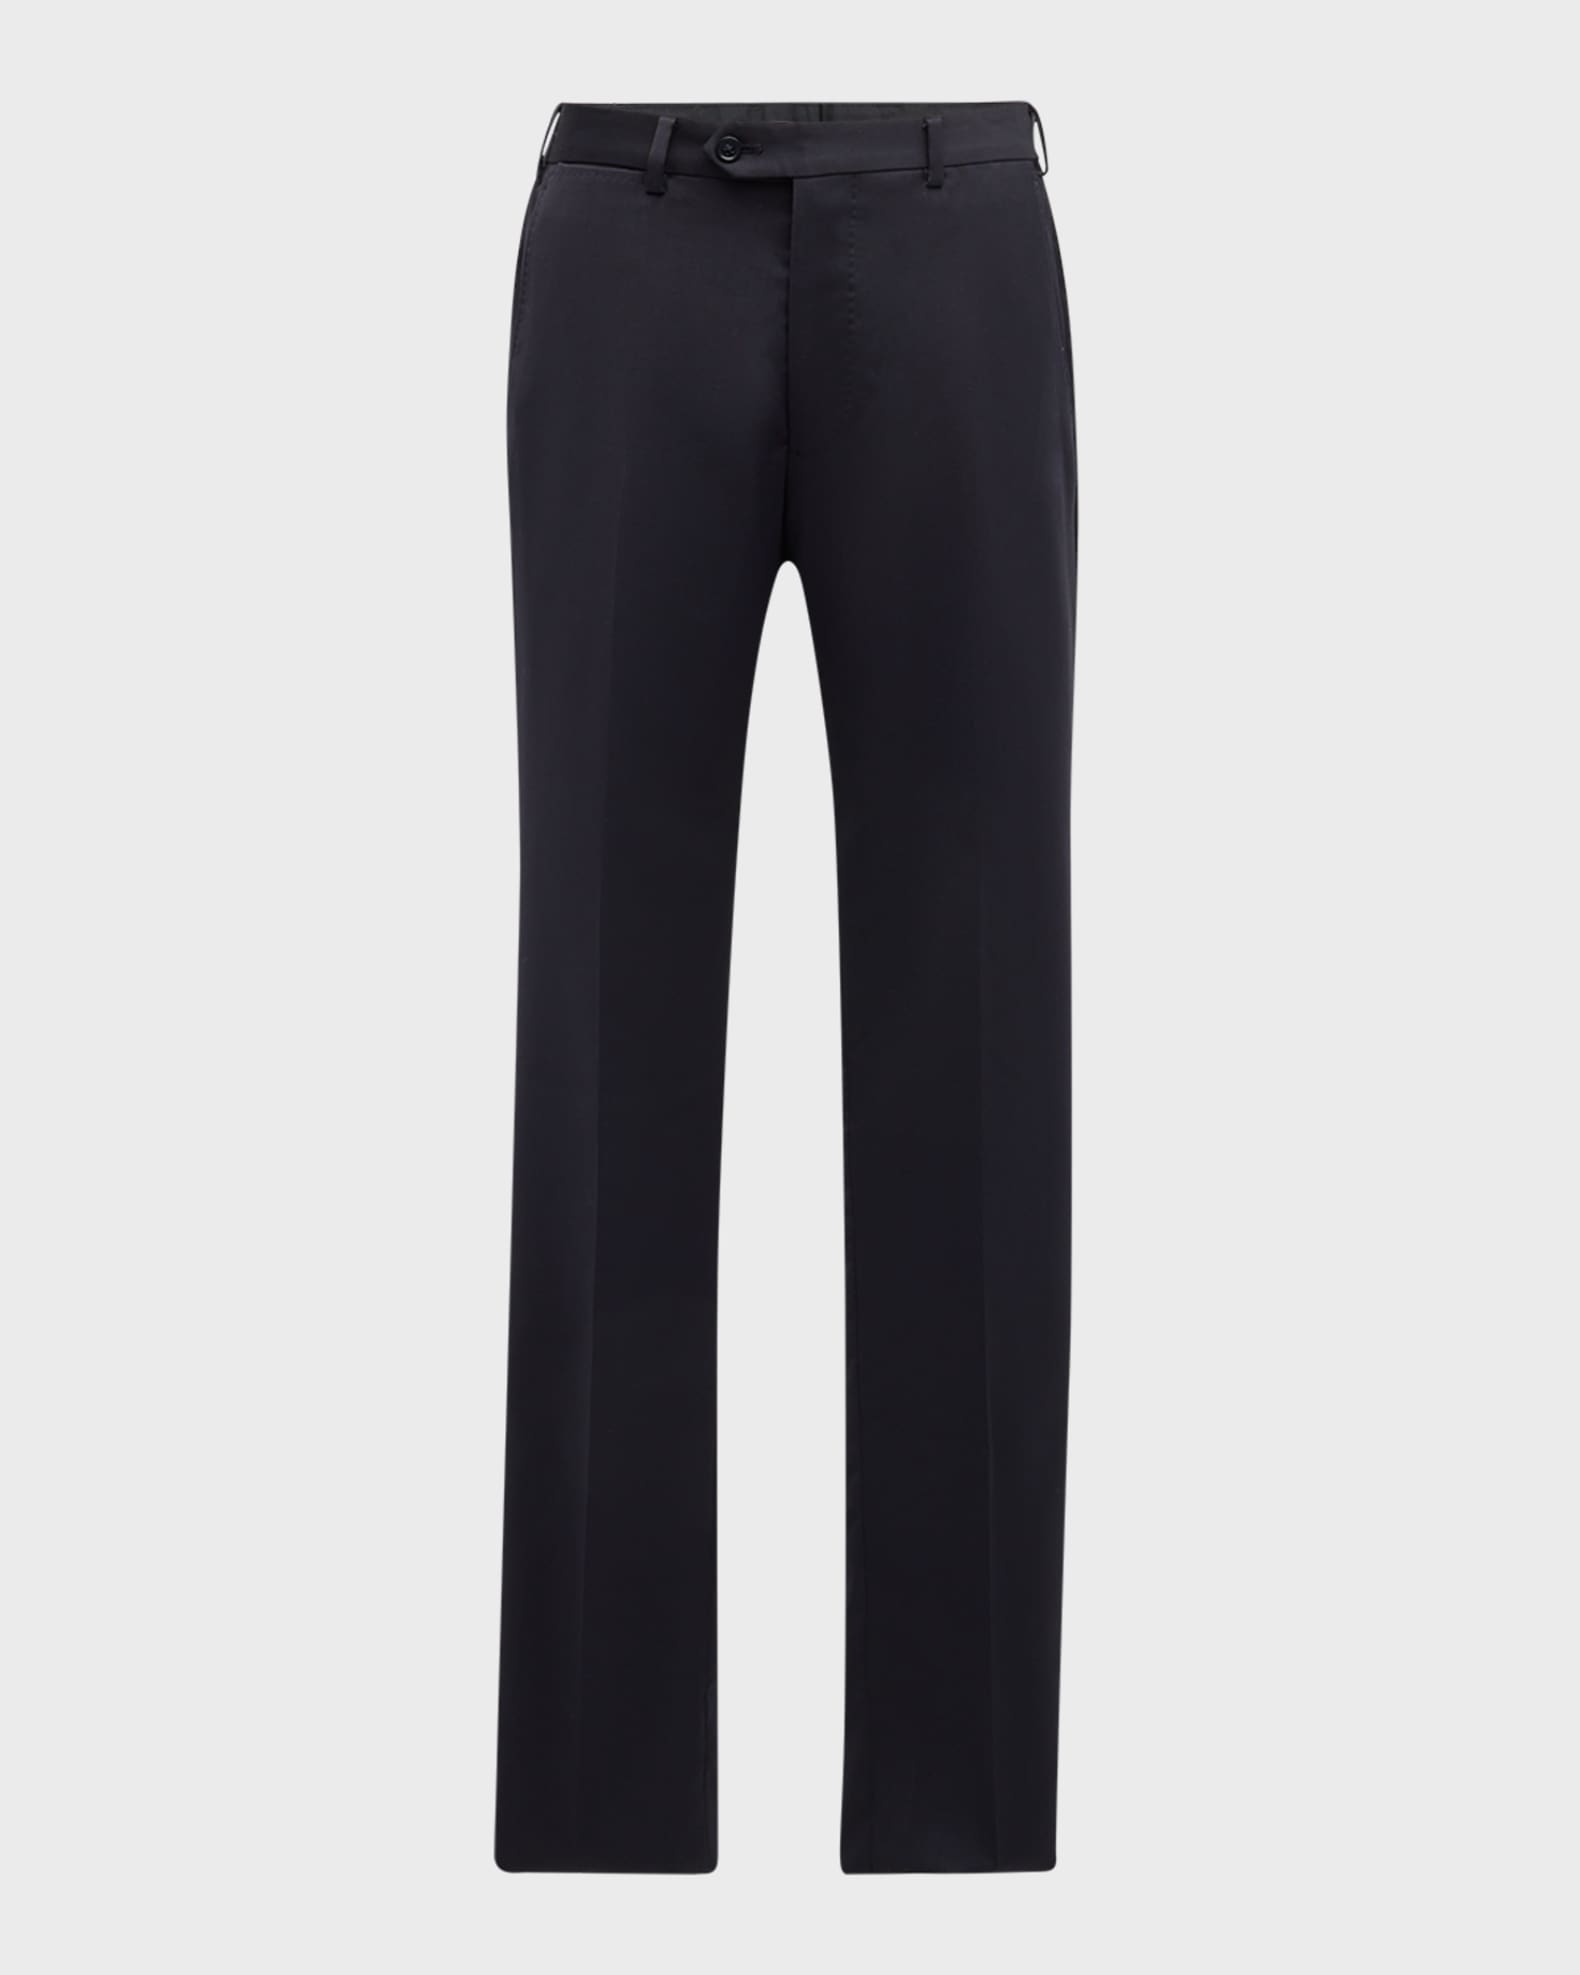 Emporio Armani Basic Flat-Front Wool Trousers | Neiman Marcus